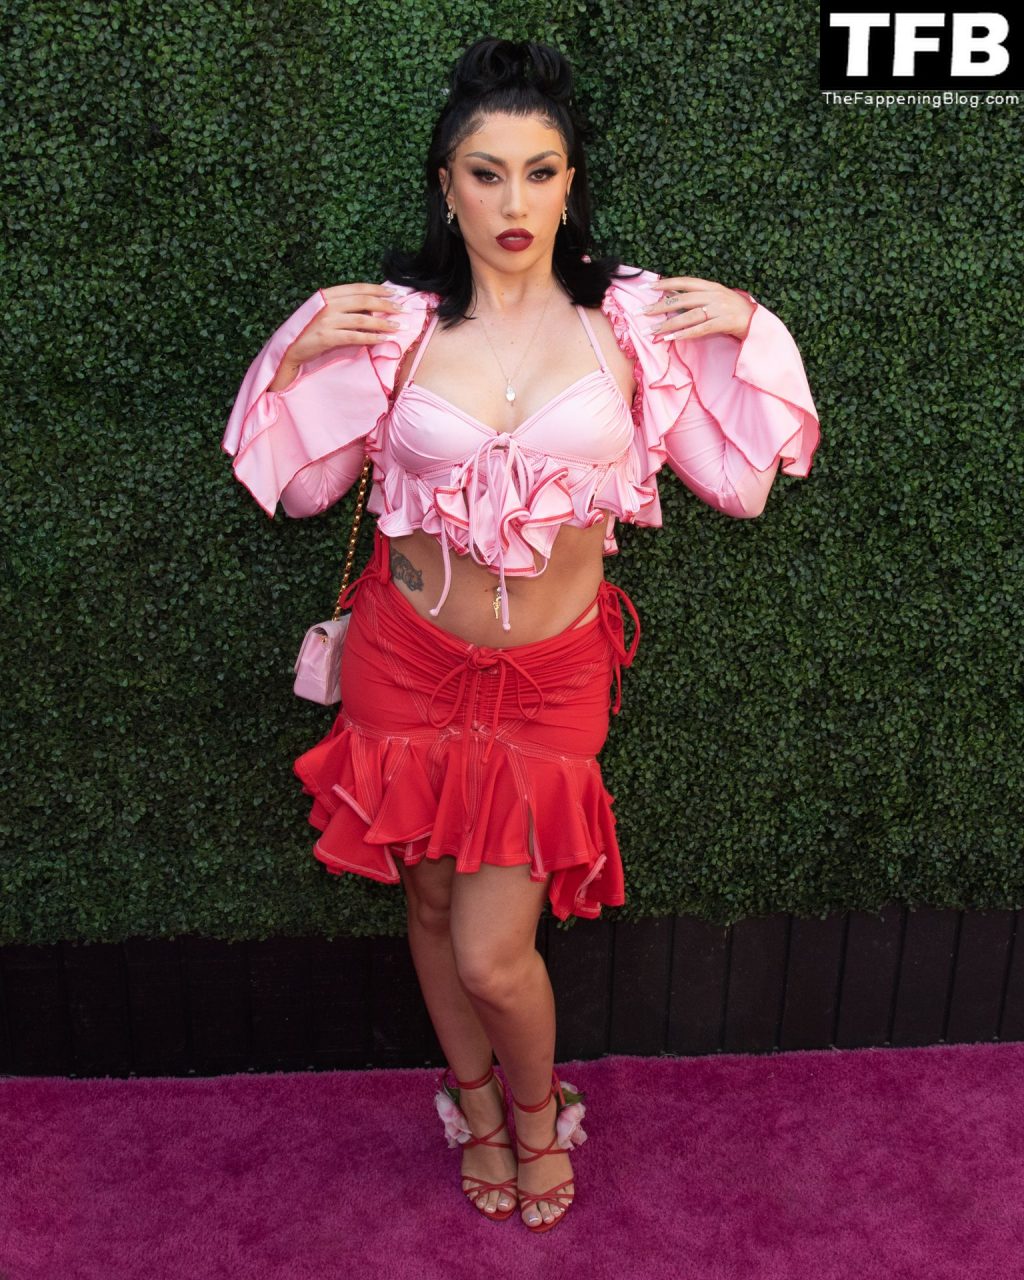 Kali Uchis Flaunts Her Sexy Tits & Legs at the 2021 Variety Hitmakers B...